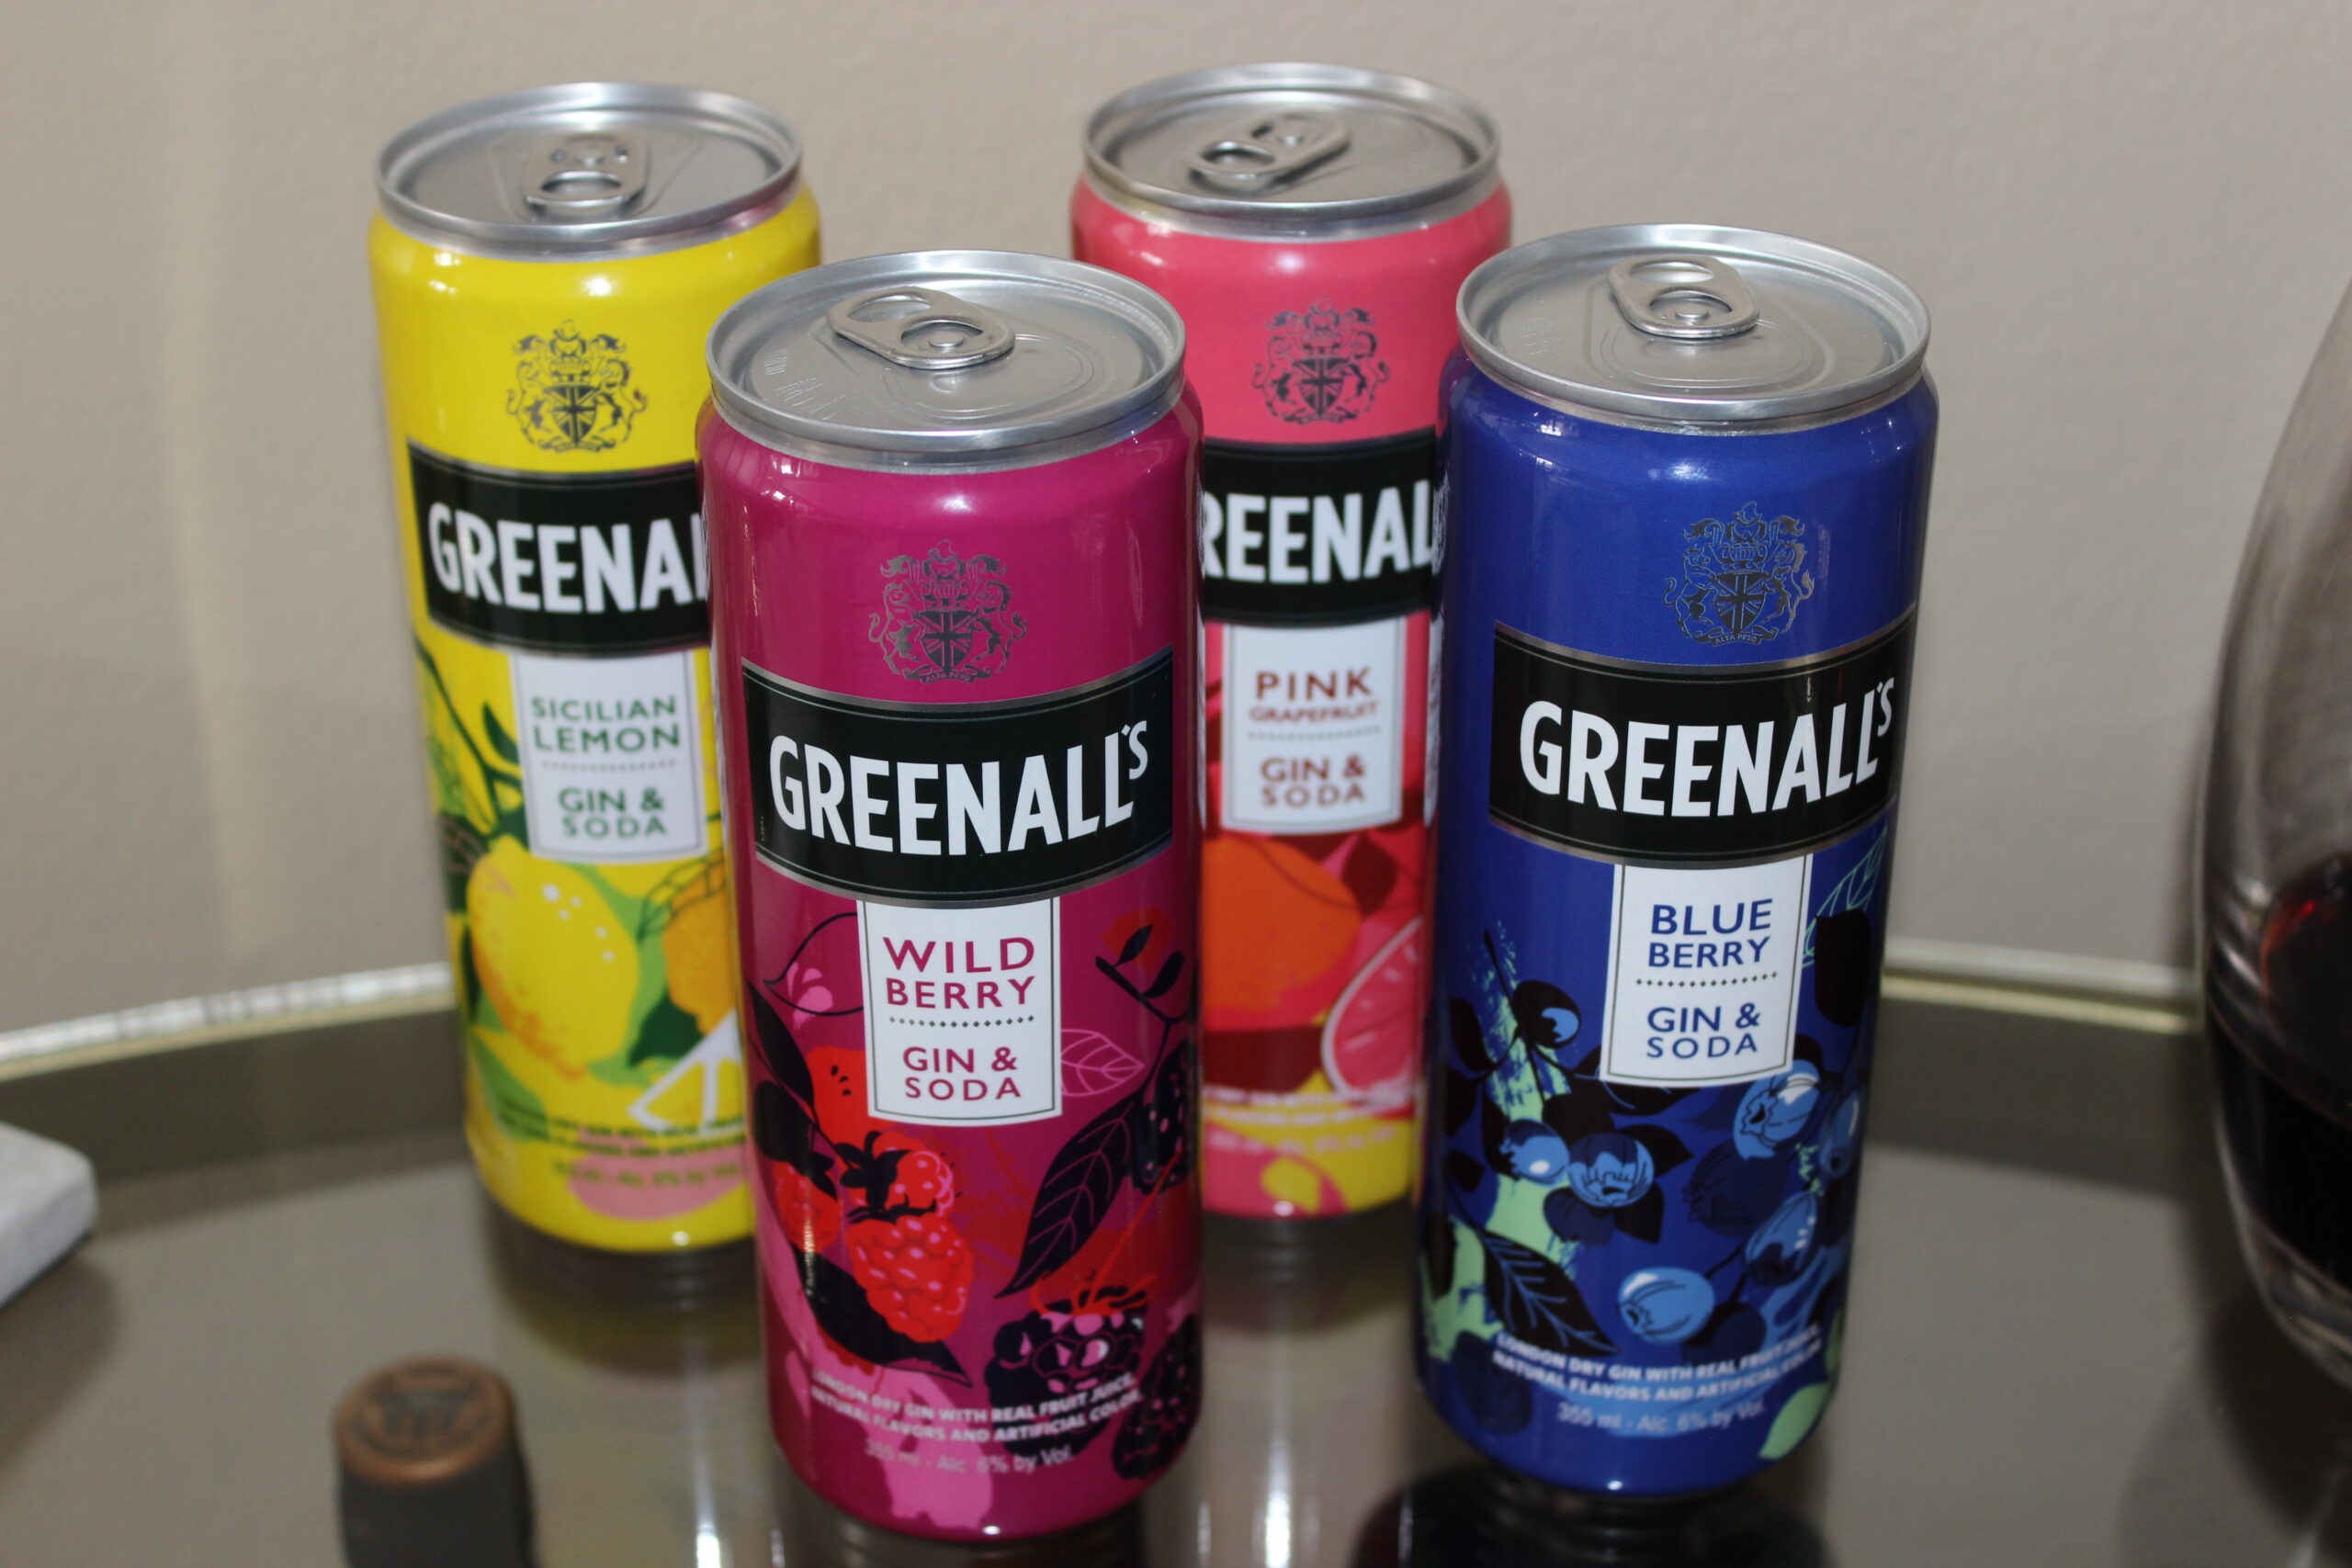 Greenall's Gin, the Very First London Dry Gin Enters America's $4.4 Billion RTD Industry with Canned Gin & Soda